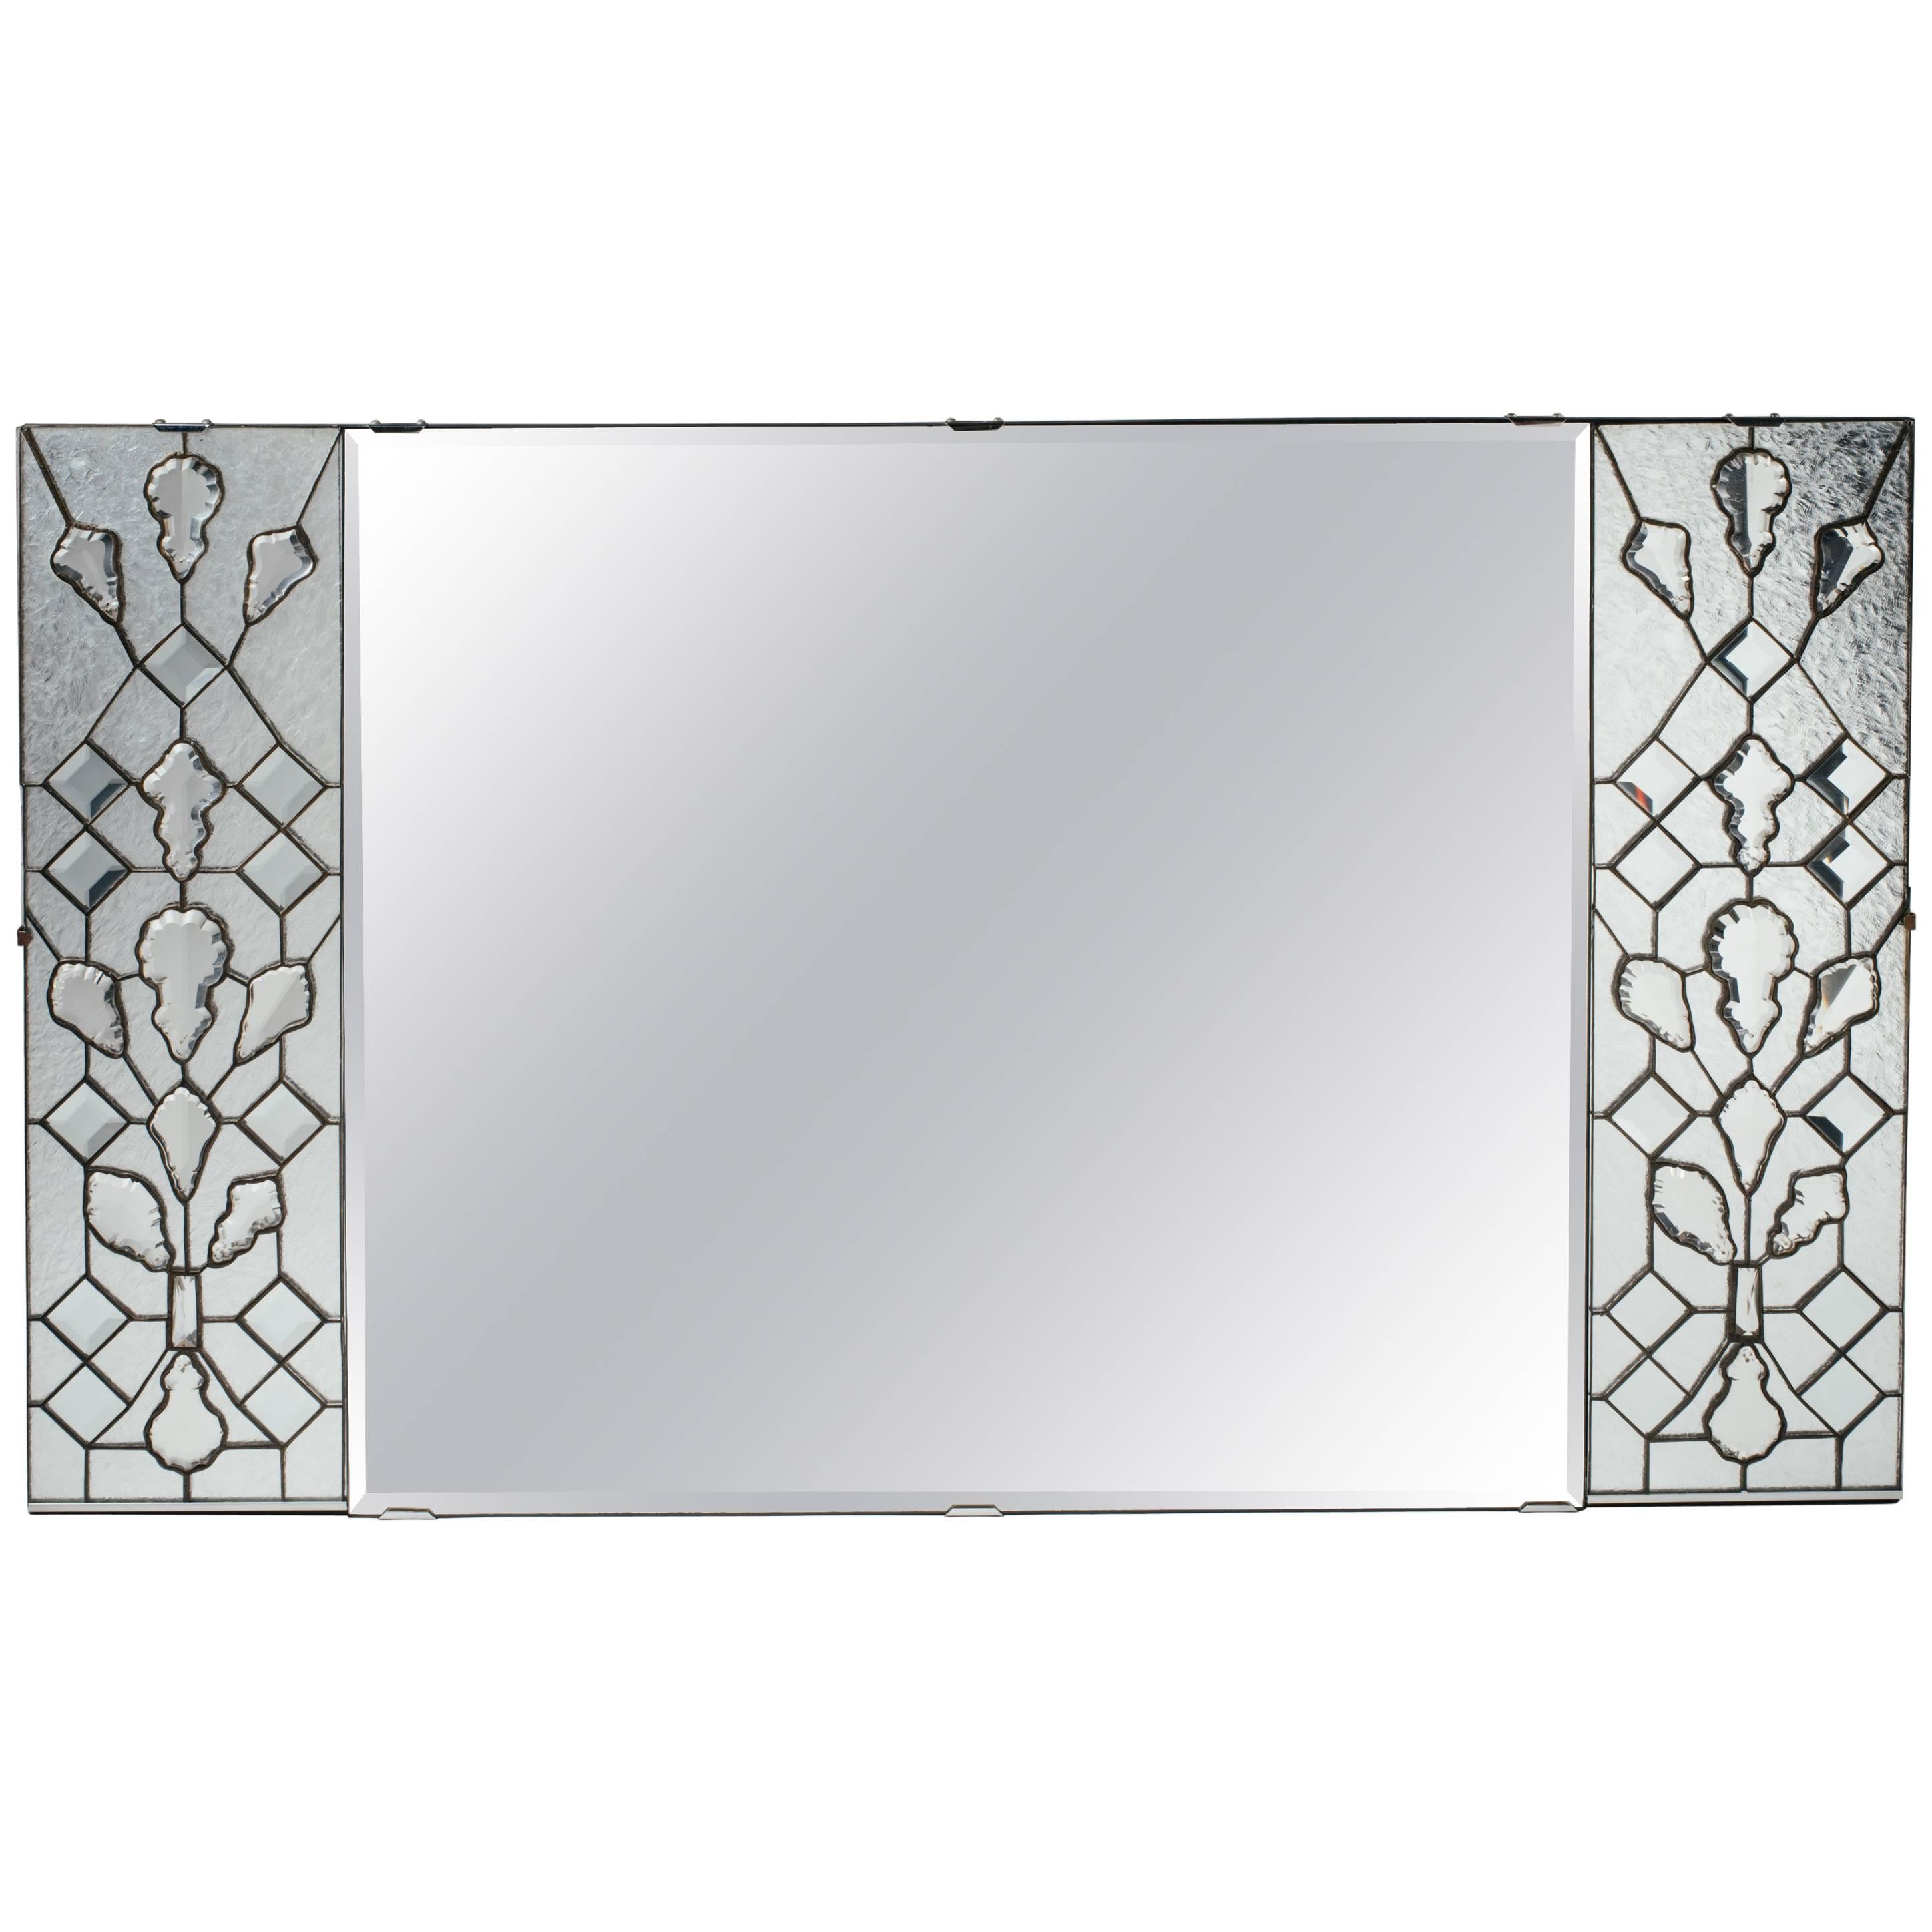 1940s Hollywood Regency Mirror with Large Cut Crystals Insets